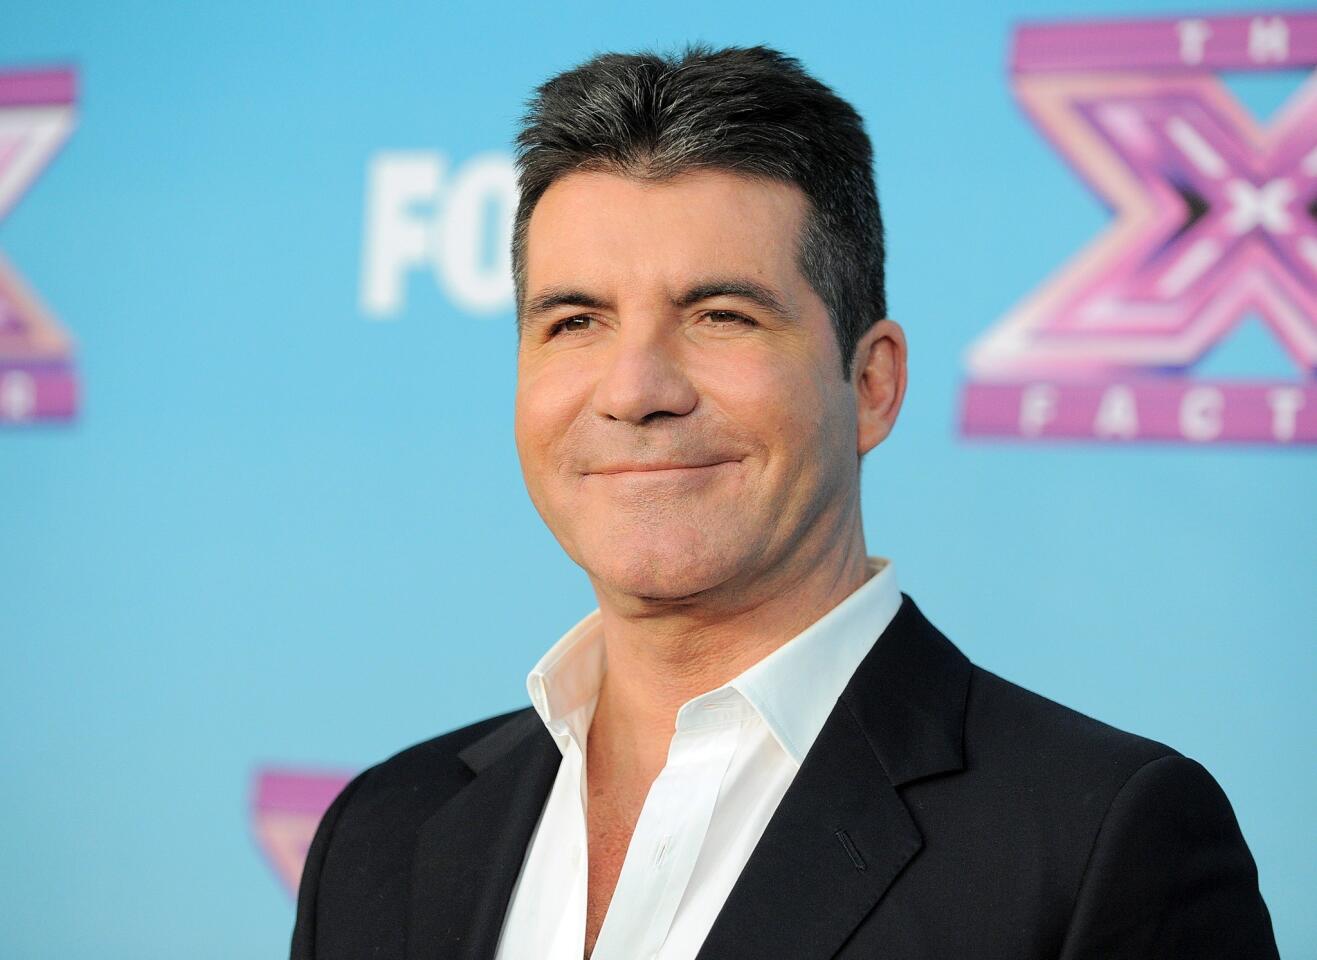 Simon Cowell gets egged on live television